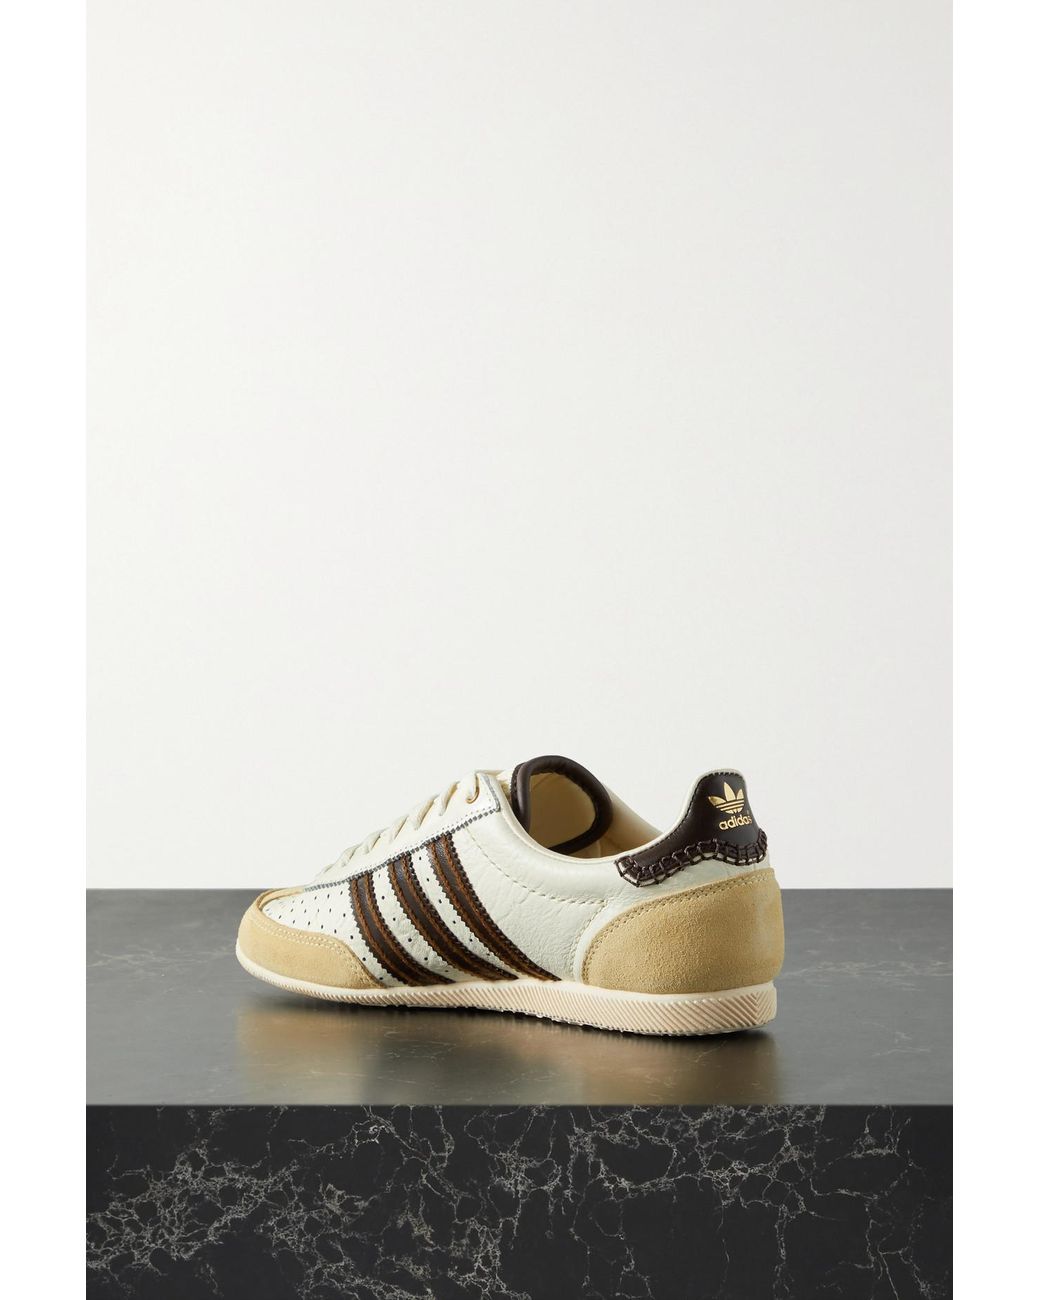 adidas Originals + Wales Bonner Japan Suede-trimmed Leather Sneakers in  White | Lyst Canada